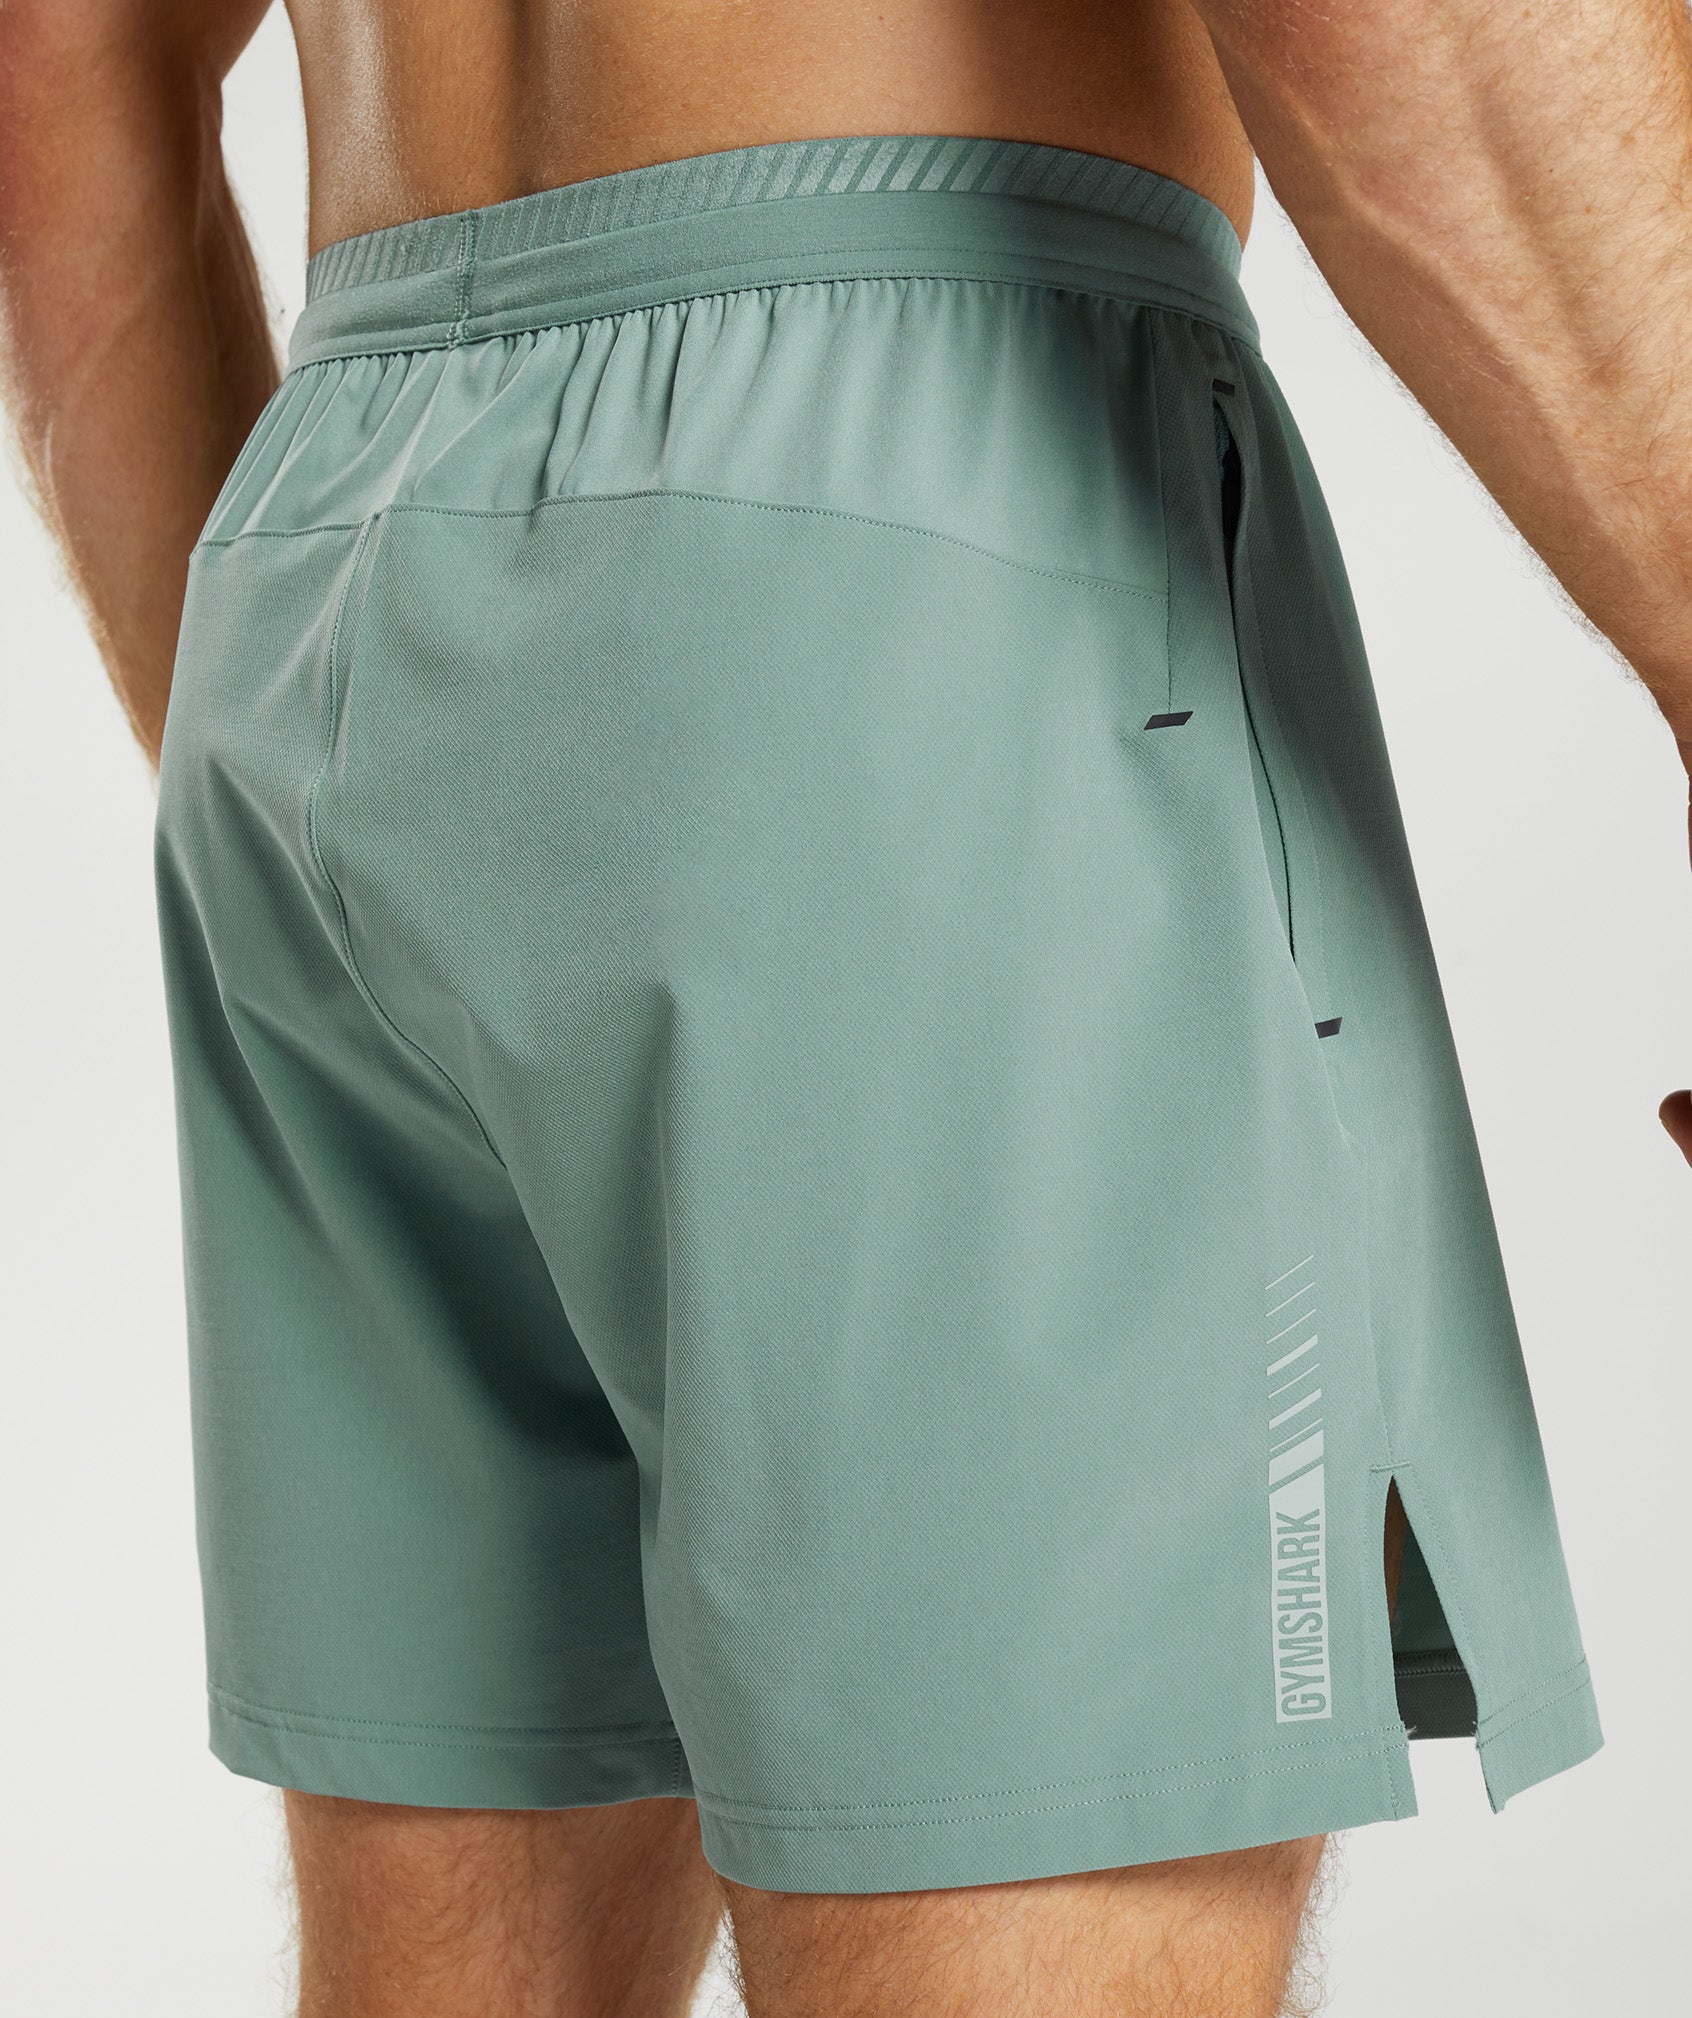 Apex 7" Hybrid Shorts in Ink Teal - view 5